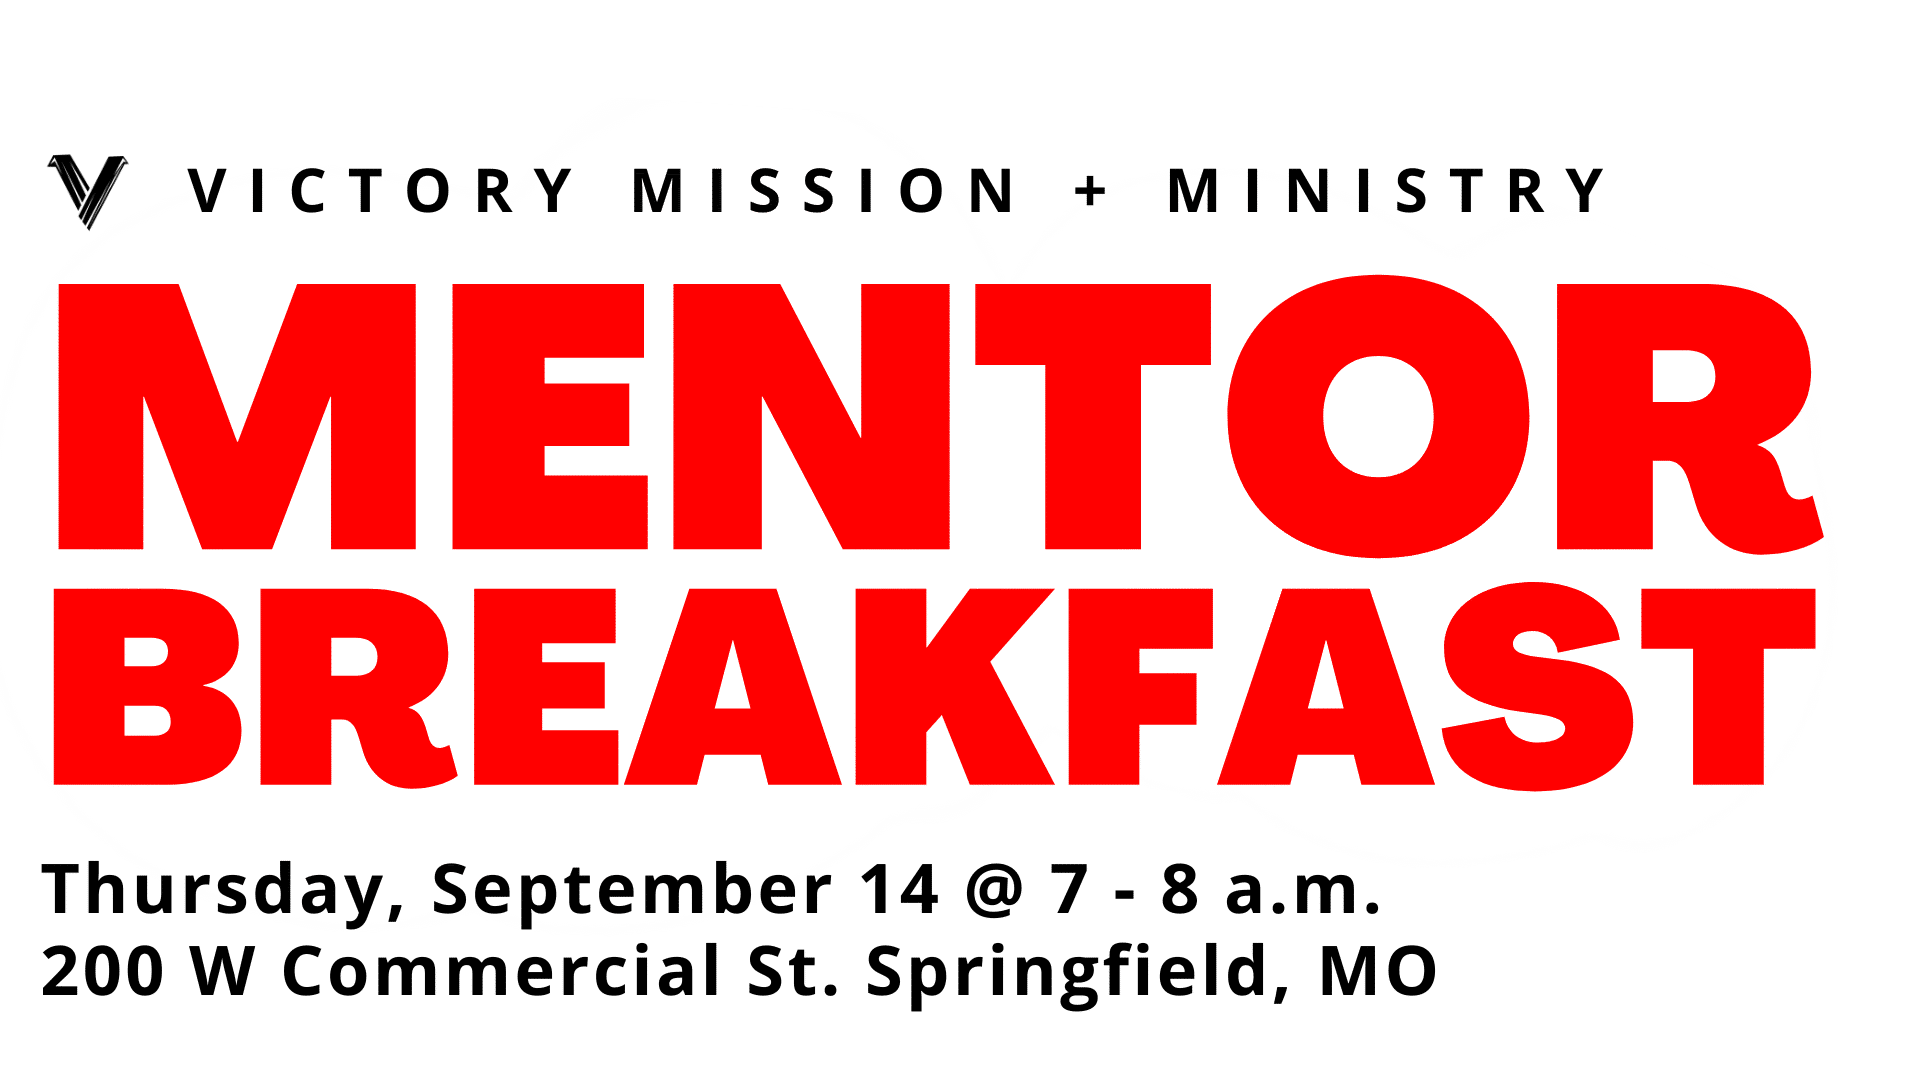 Victory Mission + Ministry Mentor Breakfast Thursday, September 14 @ 7 - 8 a.m. 200 W Commercial St. Springfield, MO